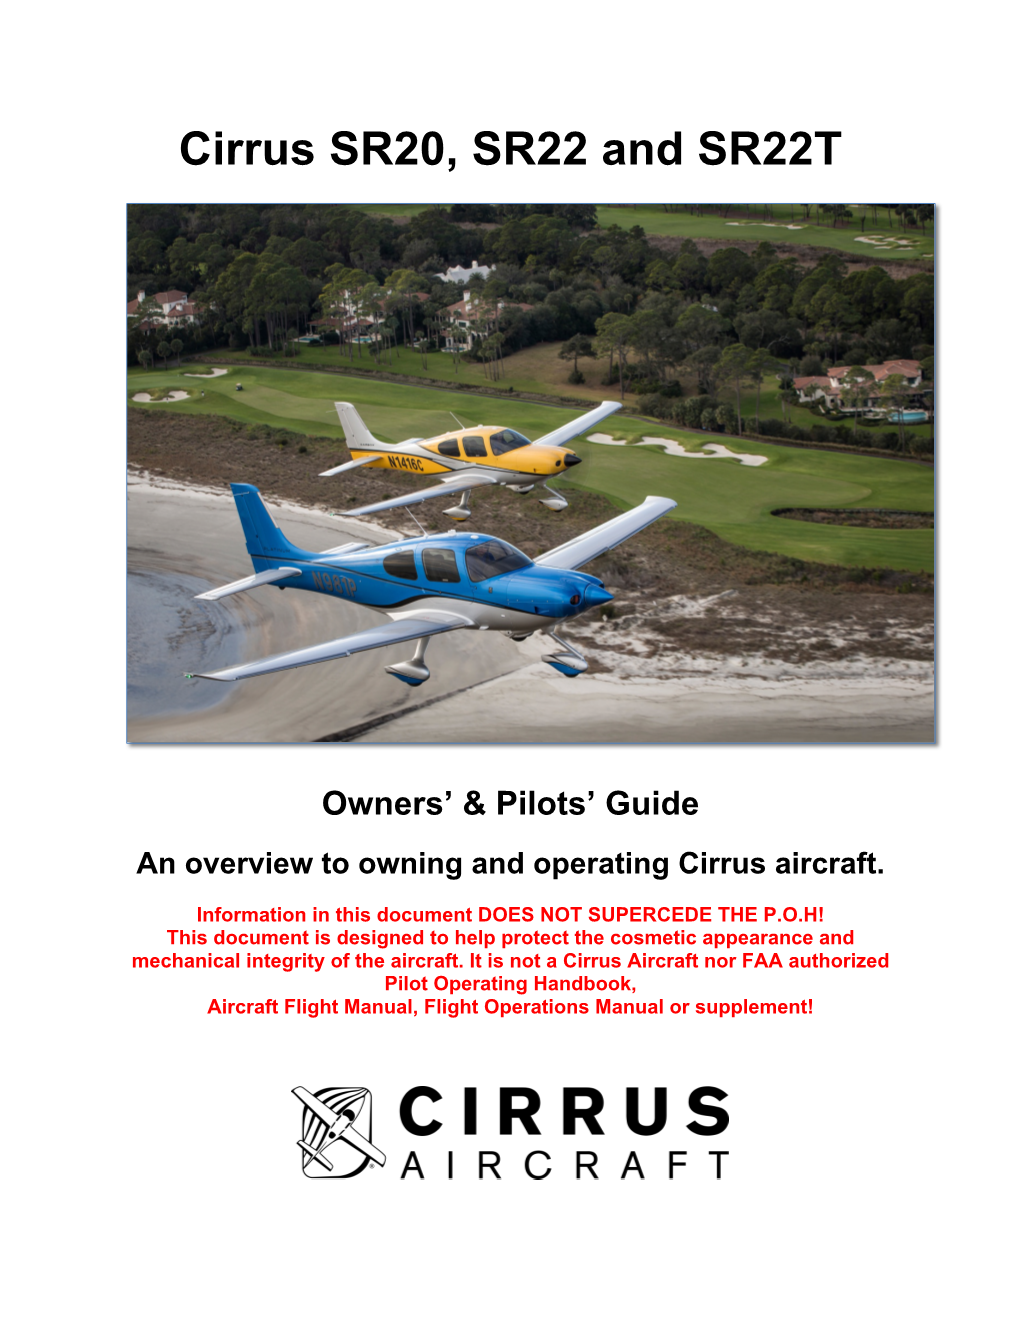 Cirrus Users Guide V26.Docx Page 2 of 23 Printed 10/10/16 Pre-Flight Inspection and Consumables